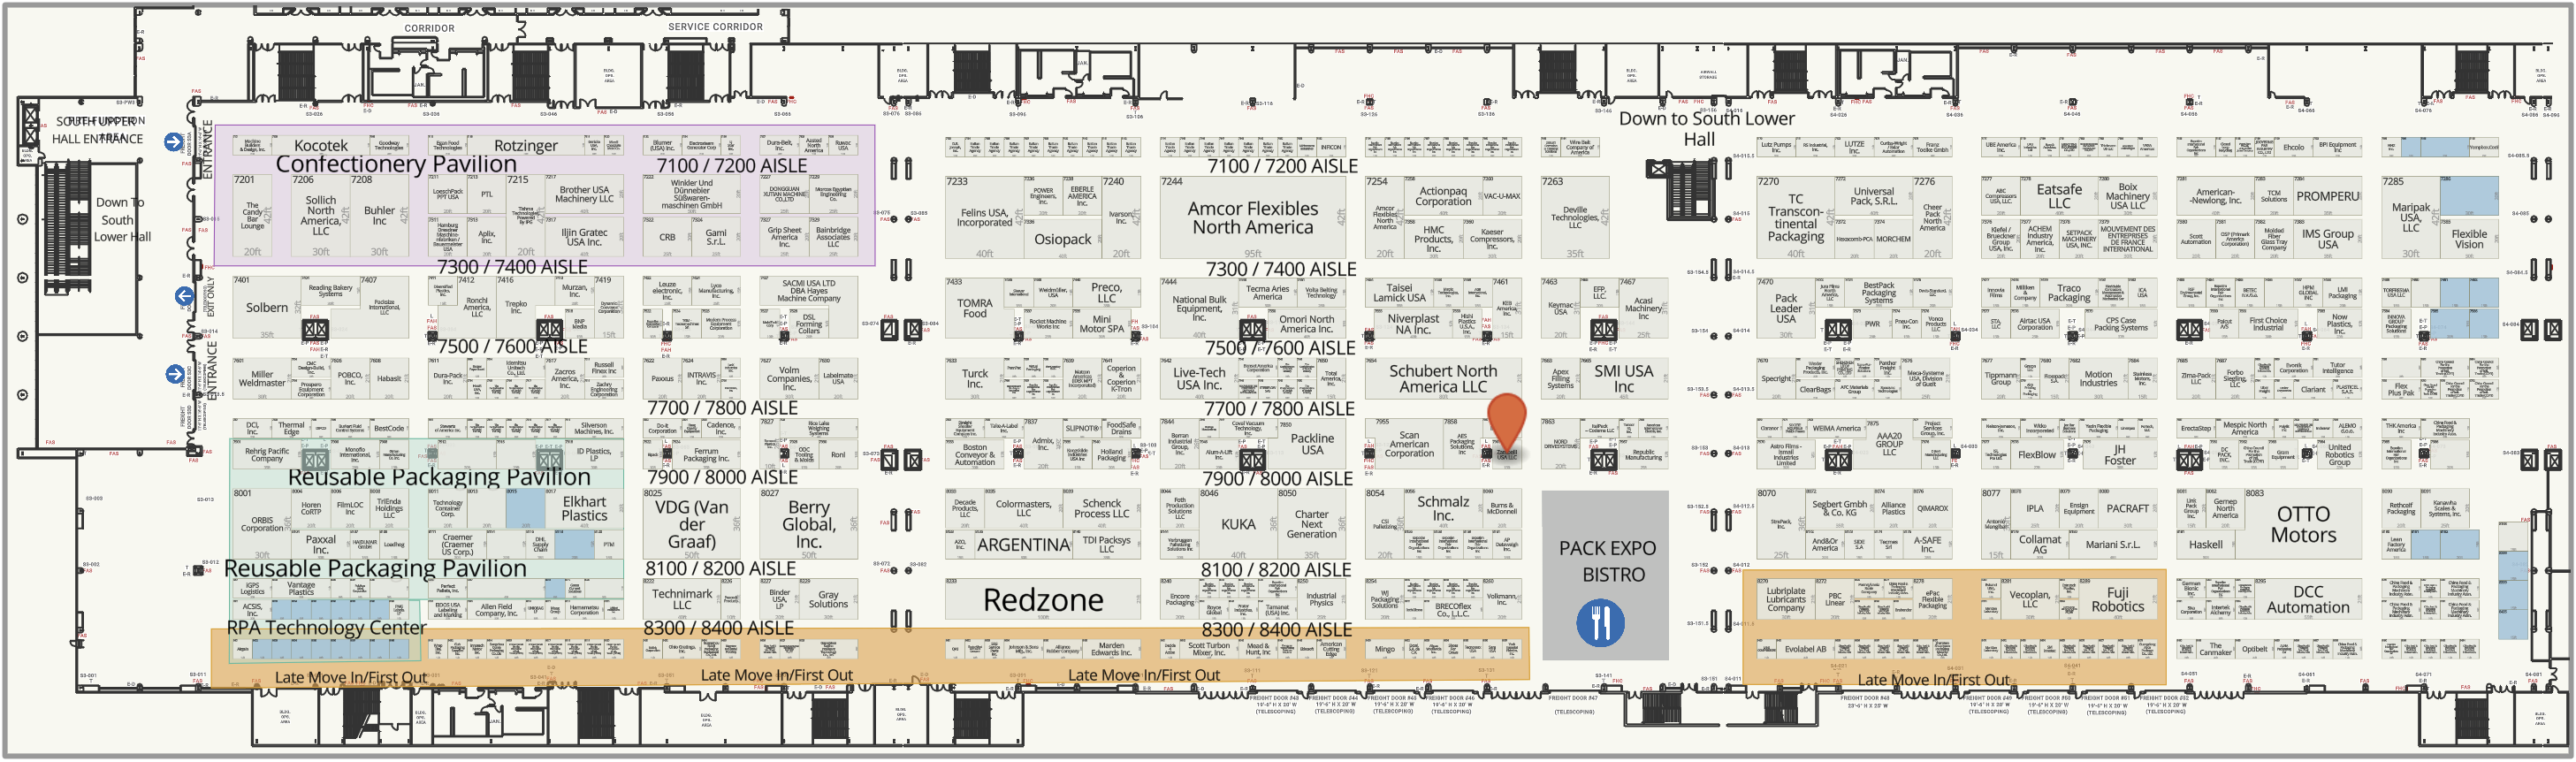 Hall South Upper - Booth 7961